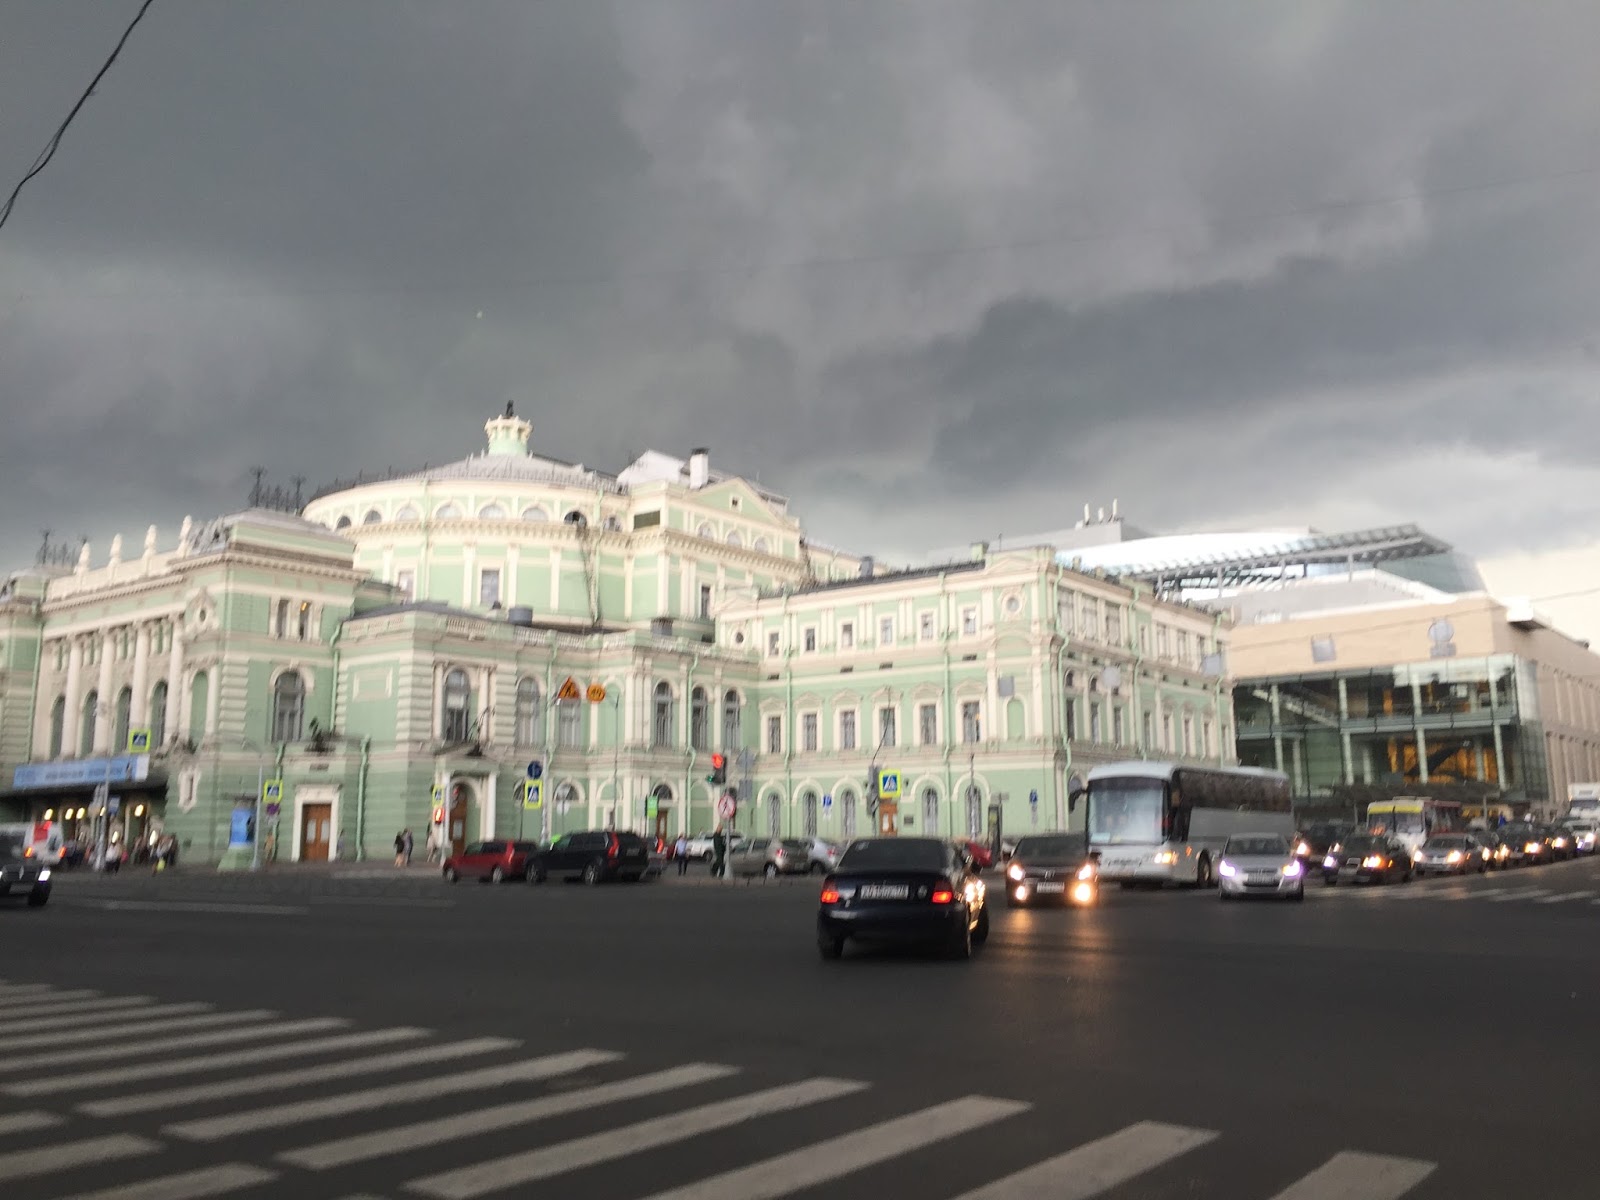 Storm is approaching near the Mariinsky theater